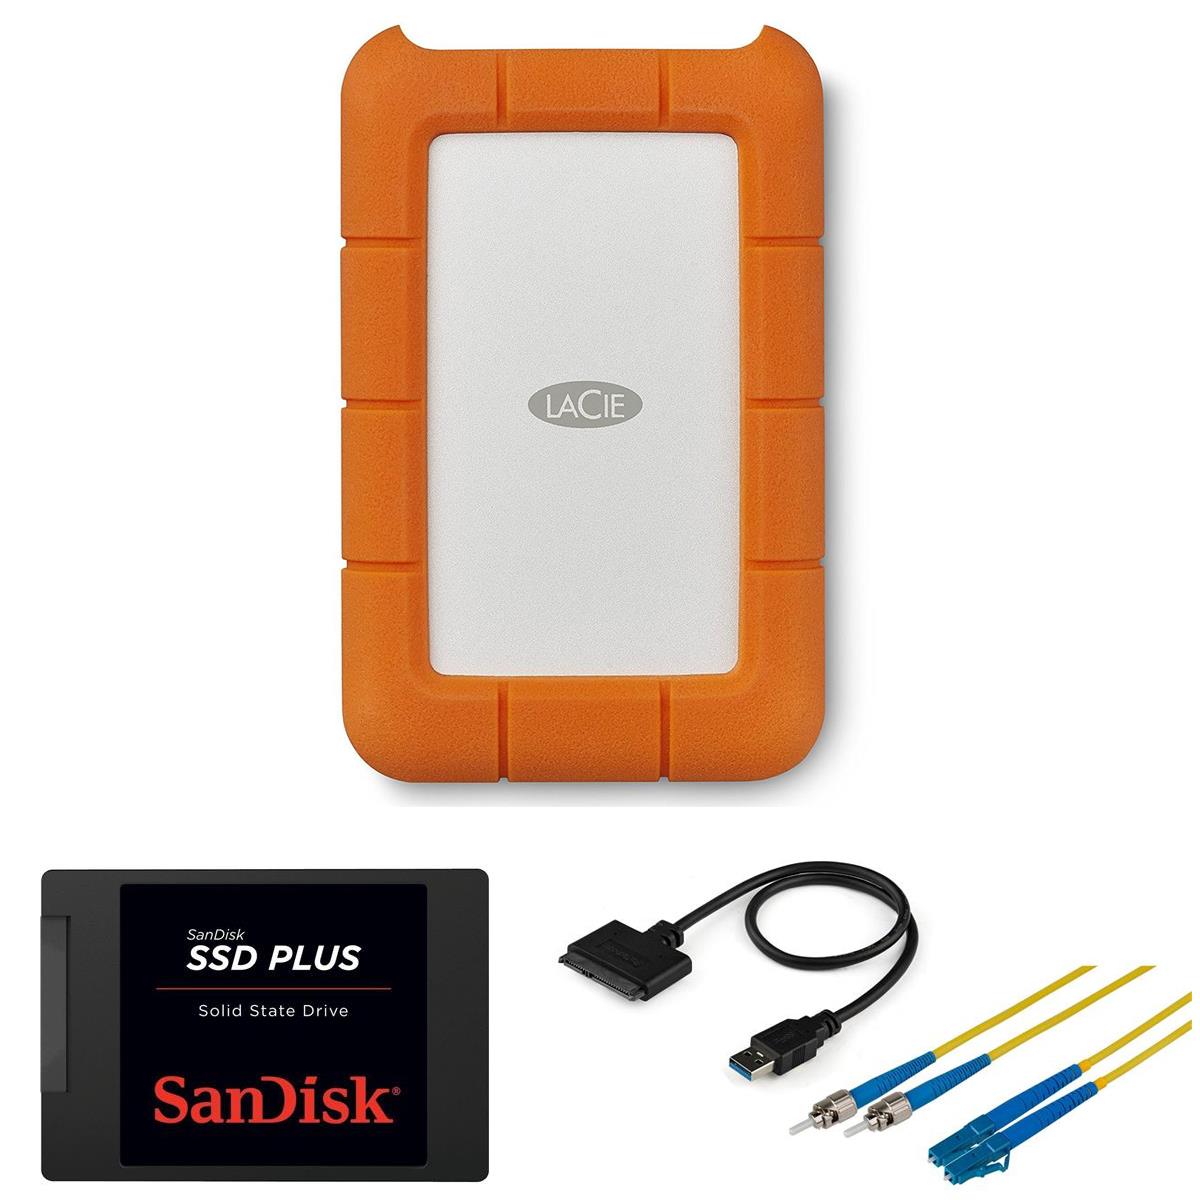 Image of LaCie Lacie 4TB Hard Drive and Sandisk 1TB SSD Bundle with Cables